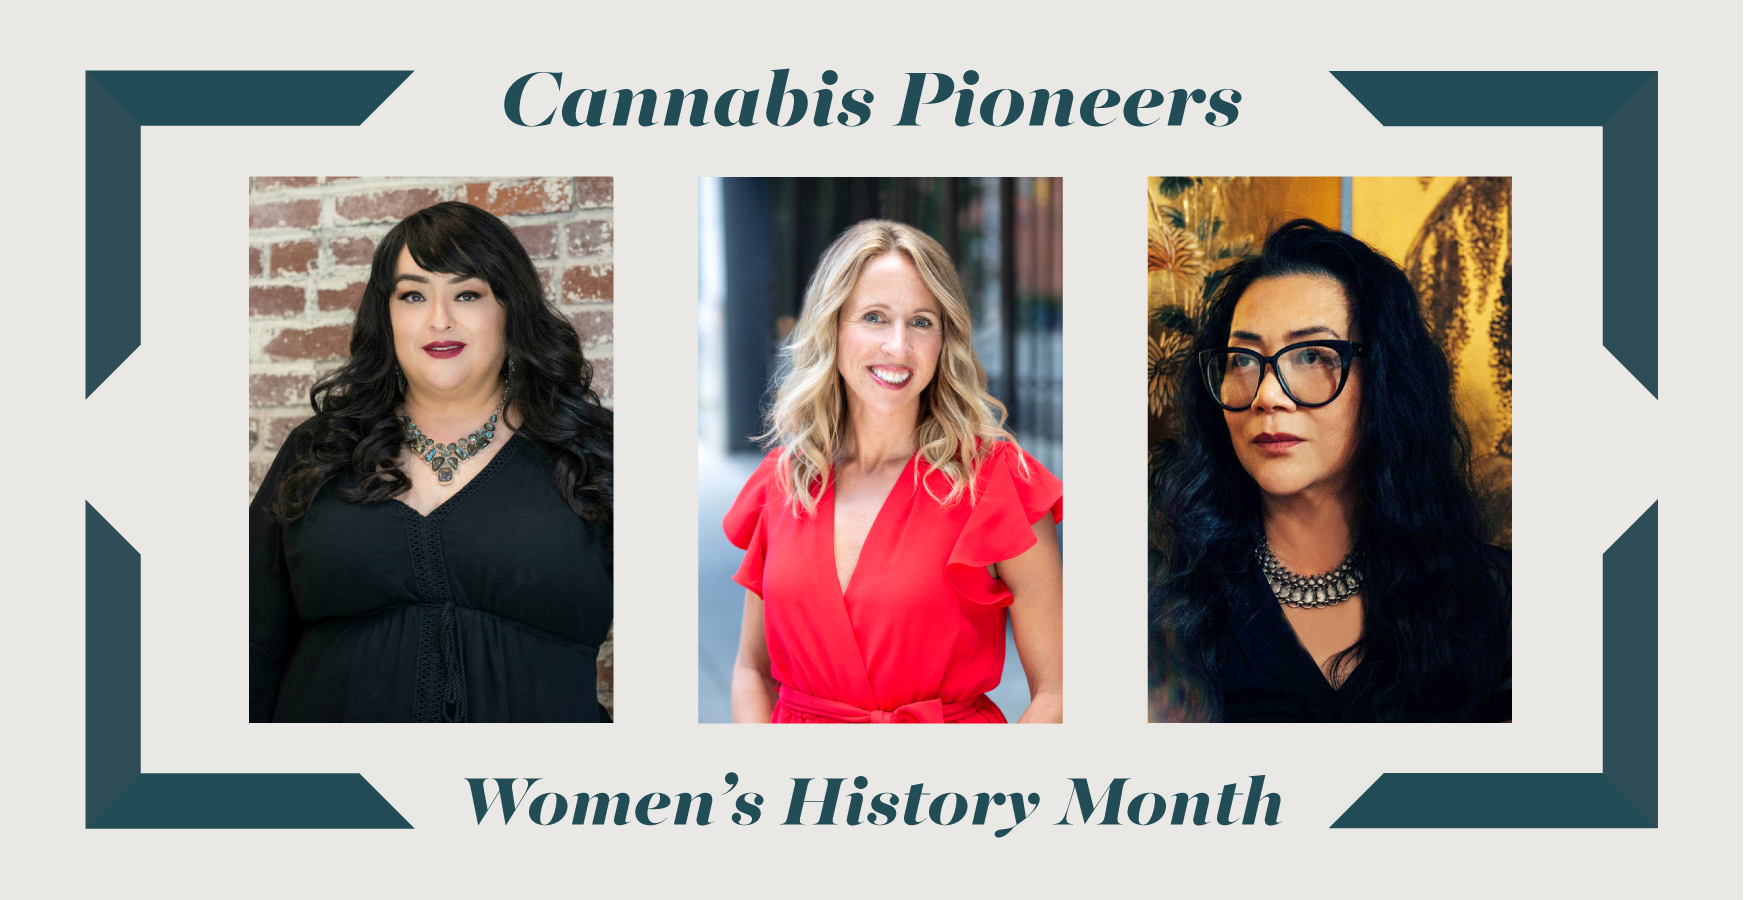 Lessons from 3 Female Founders in Cannabis: Christine De La Rosa, Emily Paxhia, and Ophelia Chong